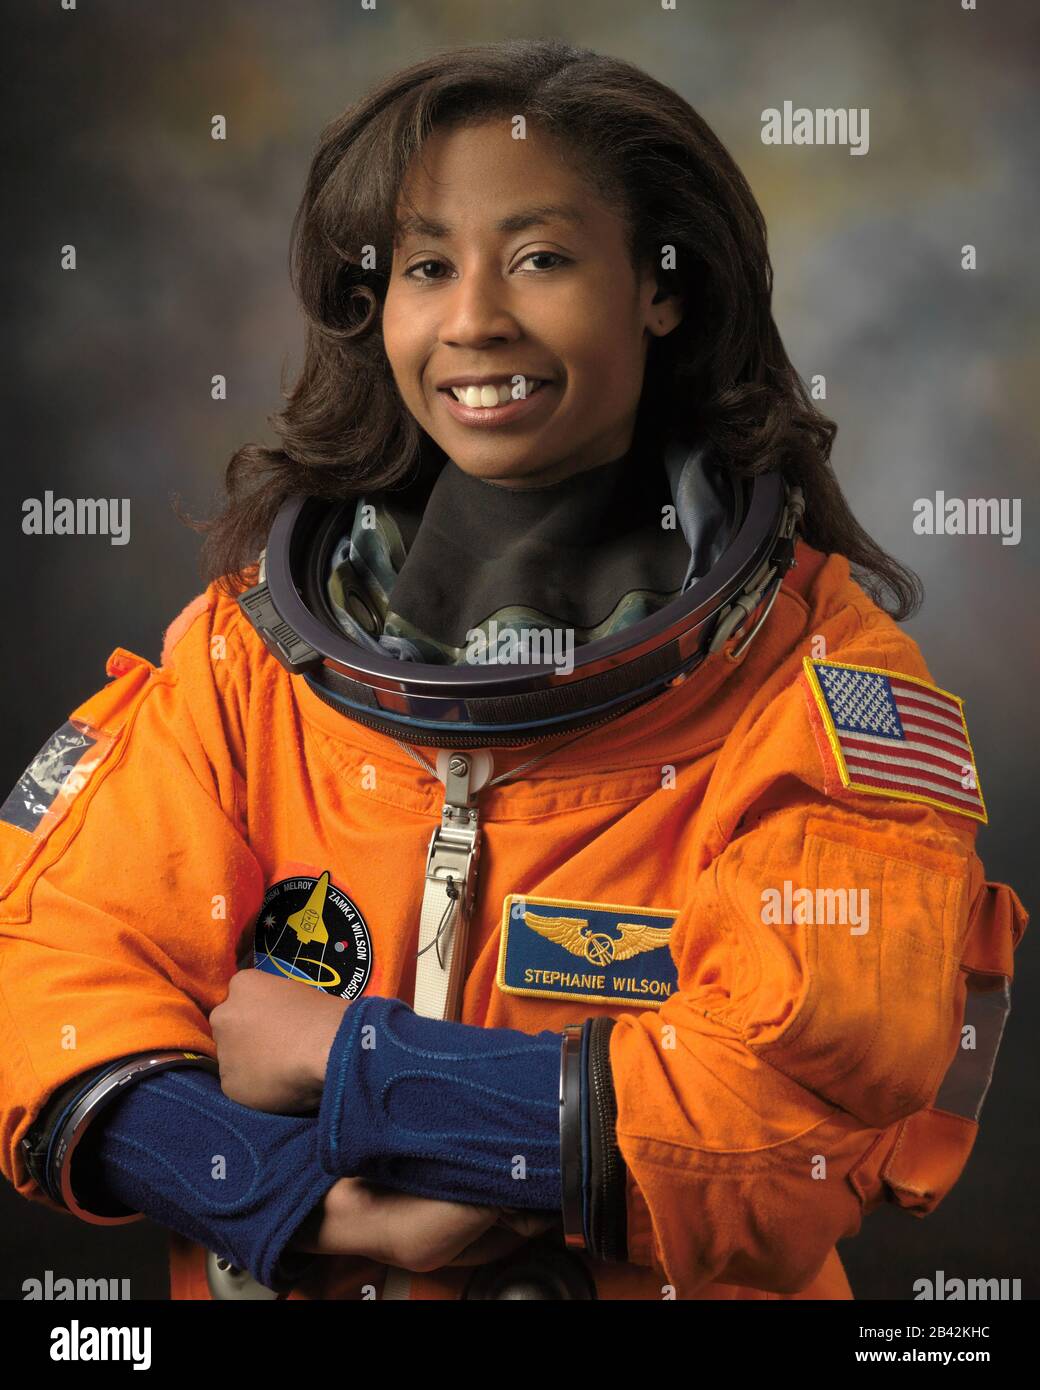 USA - 16 Feb 2017 - Formal portrait of NASA Astronaut Stephanie Wilson in her spacesuit (launch entry suit or pressure suit) Stock Photo